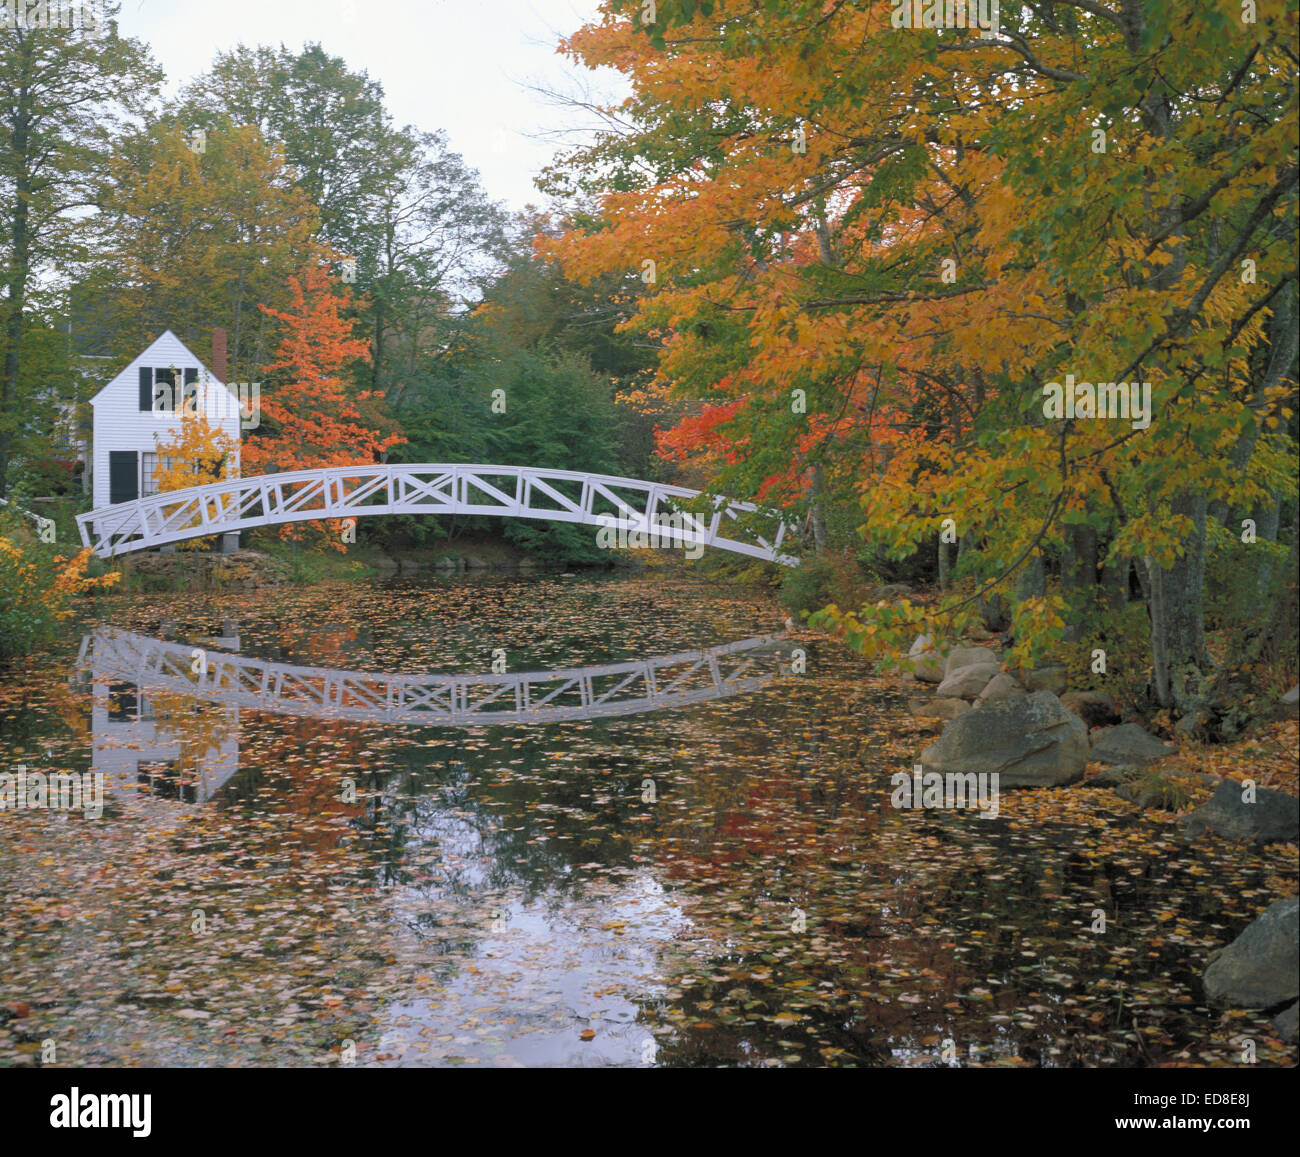 Mirror image of bridge over pond in Somesville, Maine in Fall with leaves on the trees in full color. Stock Photo